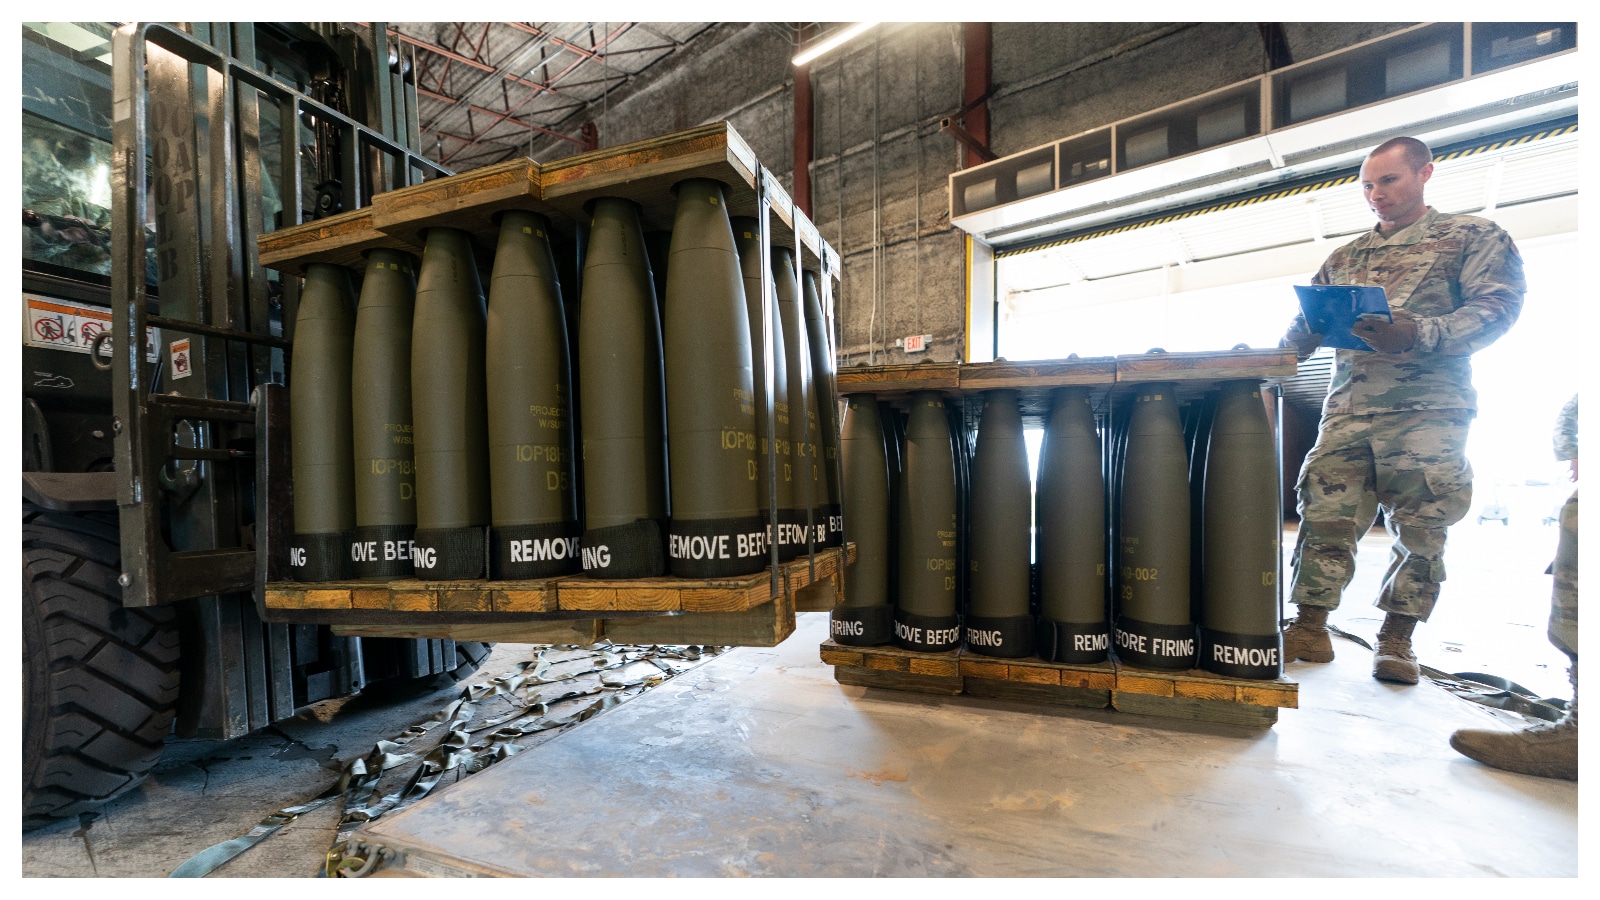 A U.S. Air Force staff sergeant checks pallets of 155 mm shells ultimately bound for Ukraine, at Dover Air Force Base, U.S., April 29, 2022. Photo: AFP.